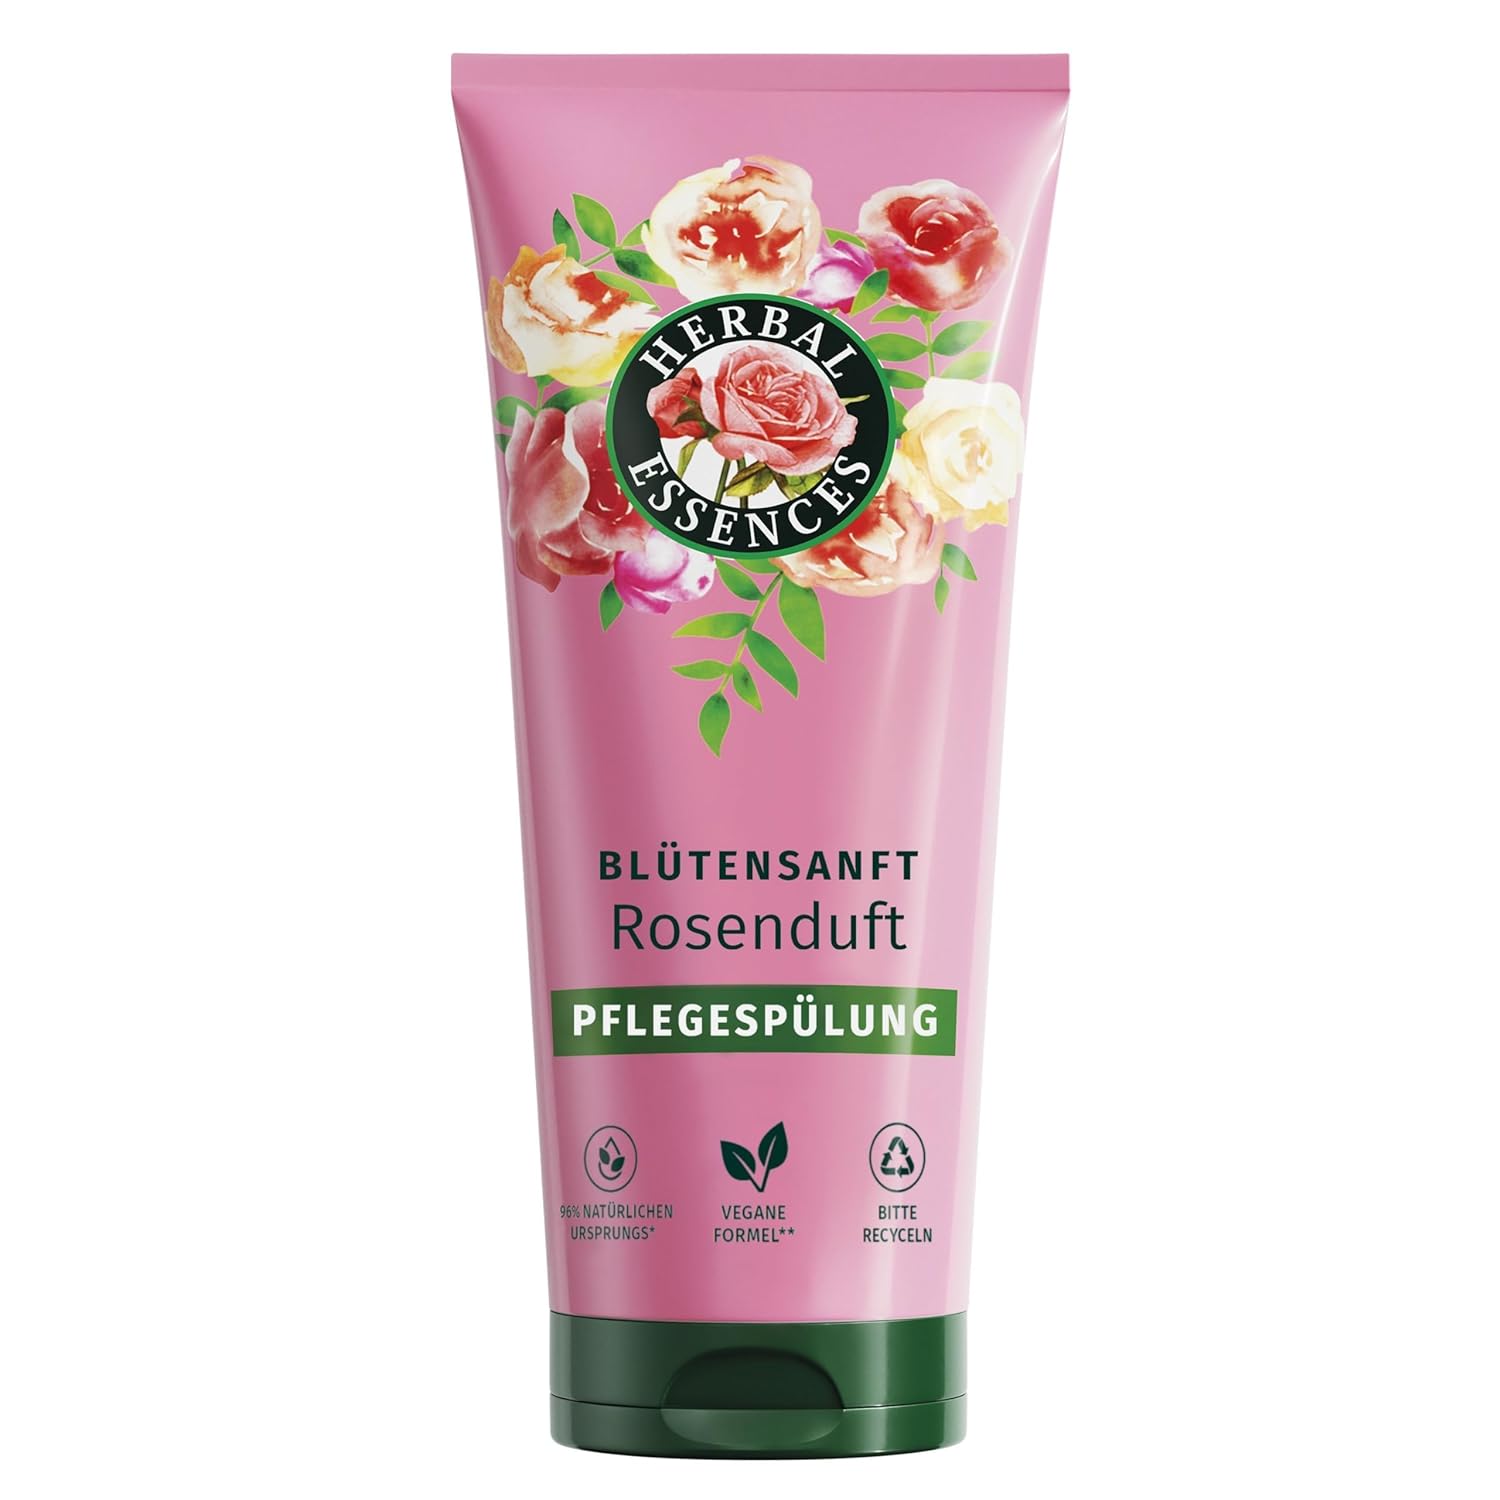 Herbal Essences Blumensanft Rose Fragrance Conditioner 250 ml From Dull Hair to Silky Shiny Hair, With Rose Essence, Ingredients of Natural Origin, Vegan